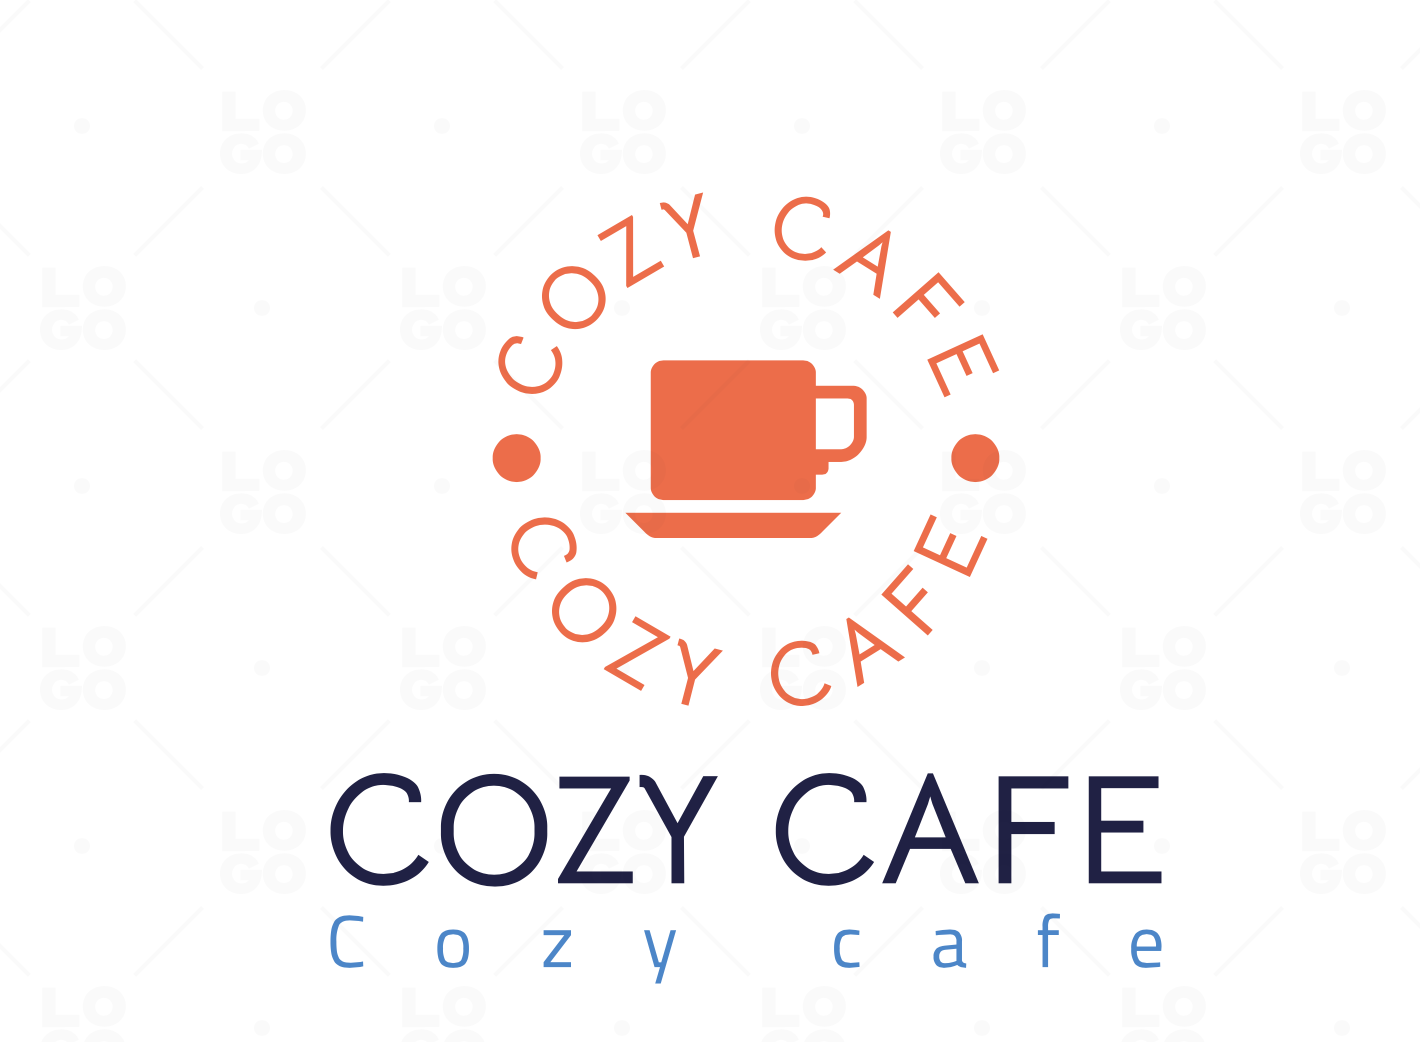 The Cozy Cafe